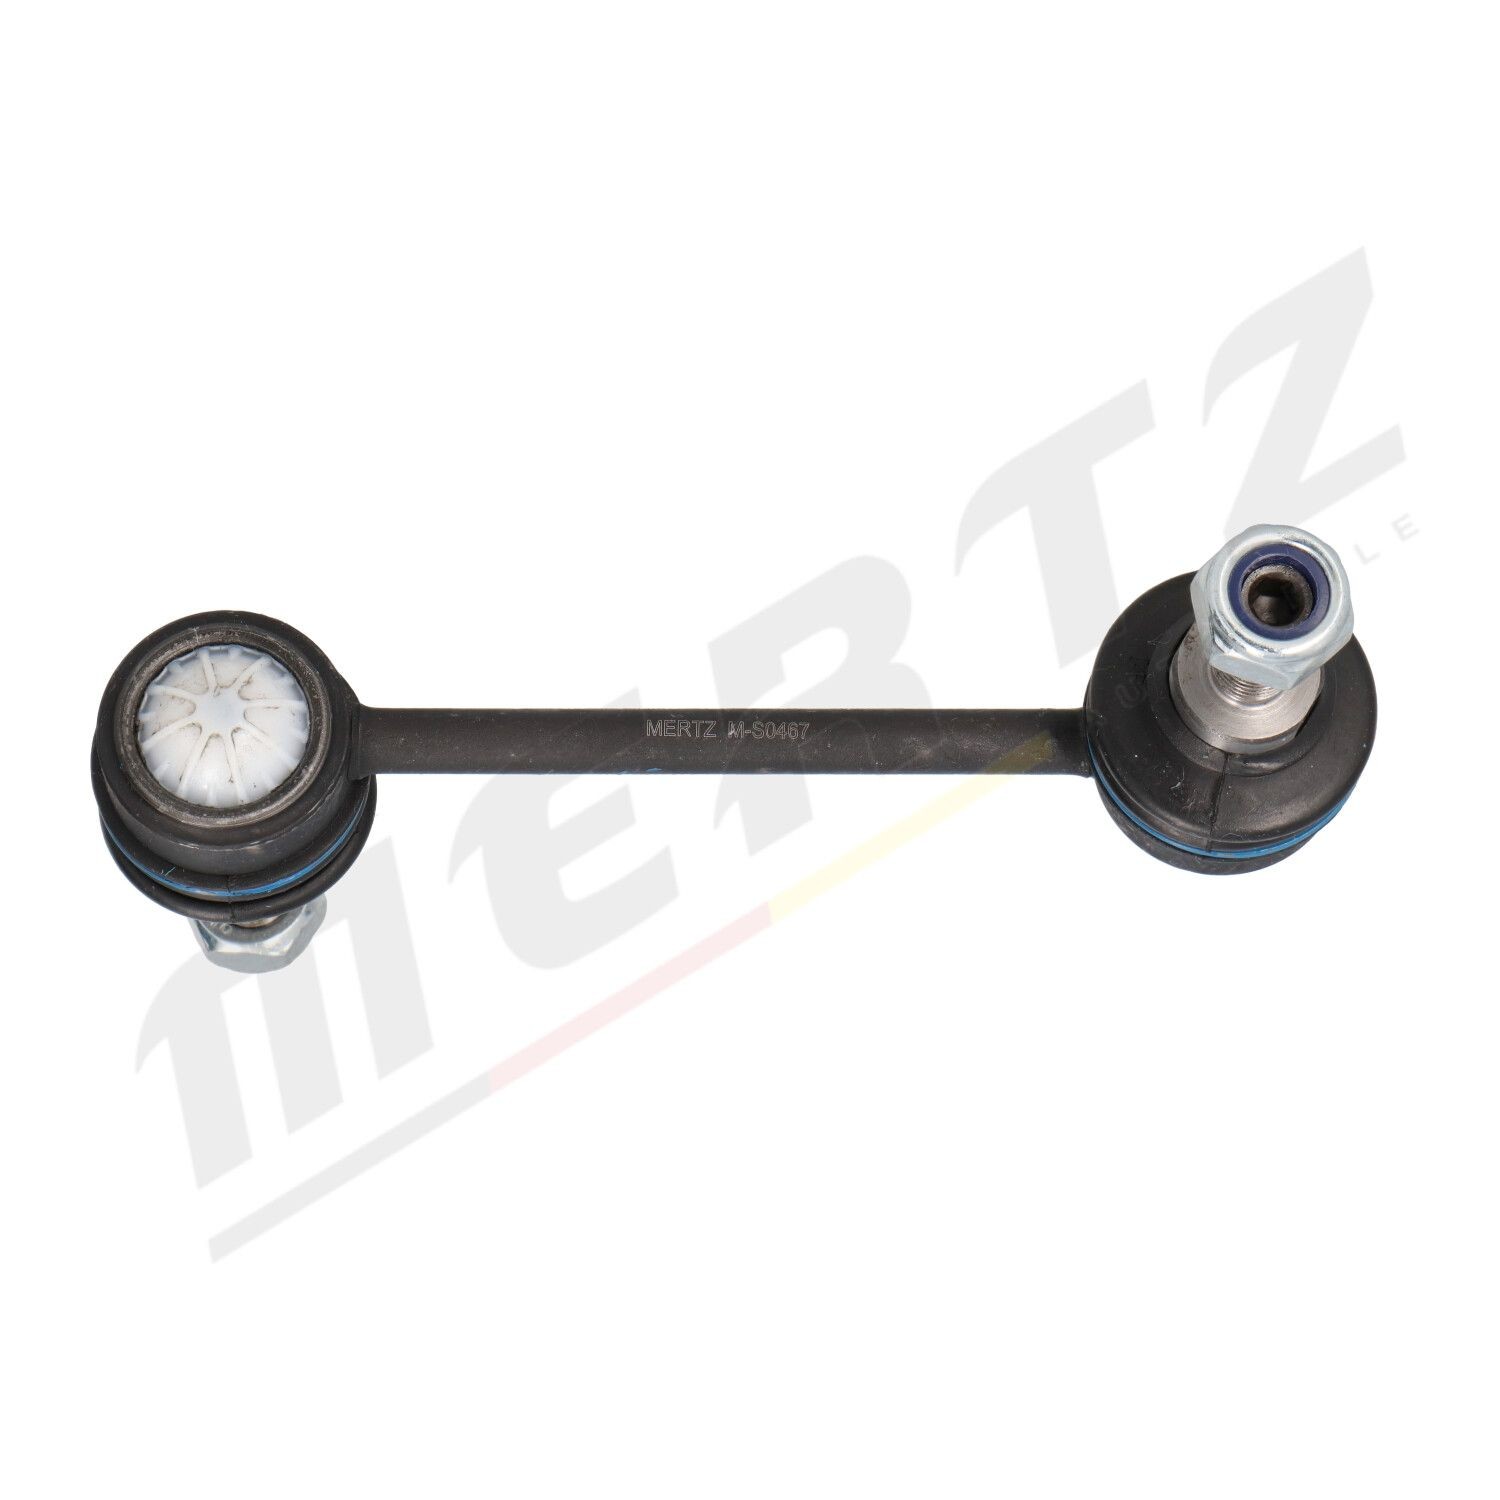 MERTZ Front Axle Left, Front Axle Right, 124mm, M10x1,25 , with nut, Steel Length: 124mm Drop link M-S0467 buy